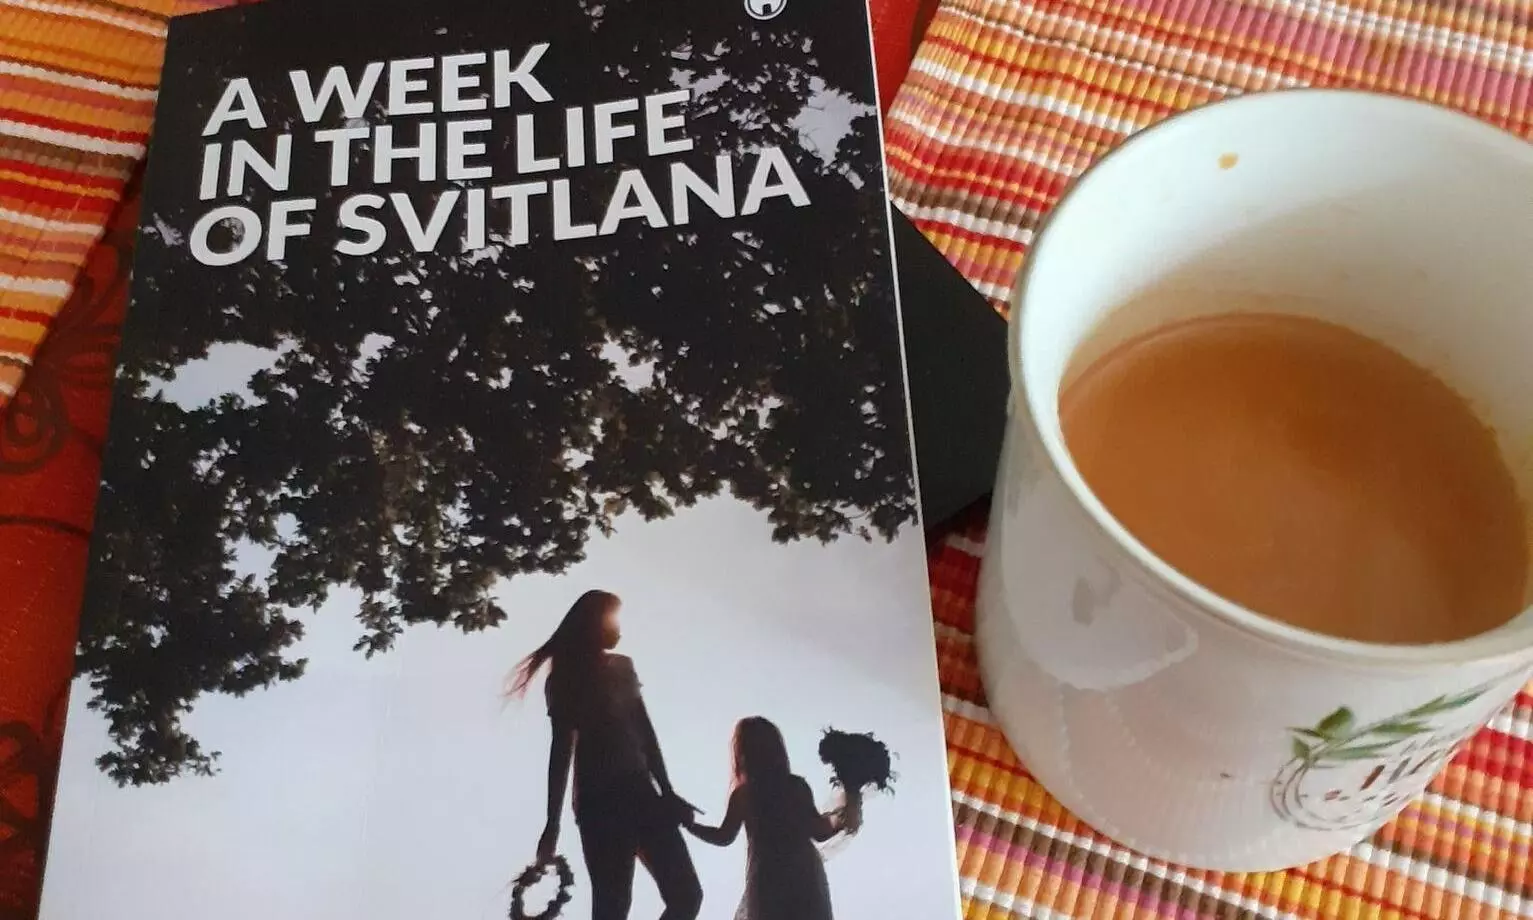 Reading A week in the life of Svitlana